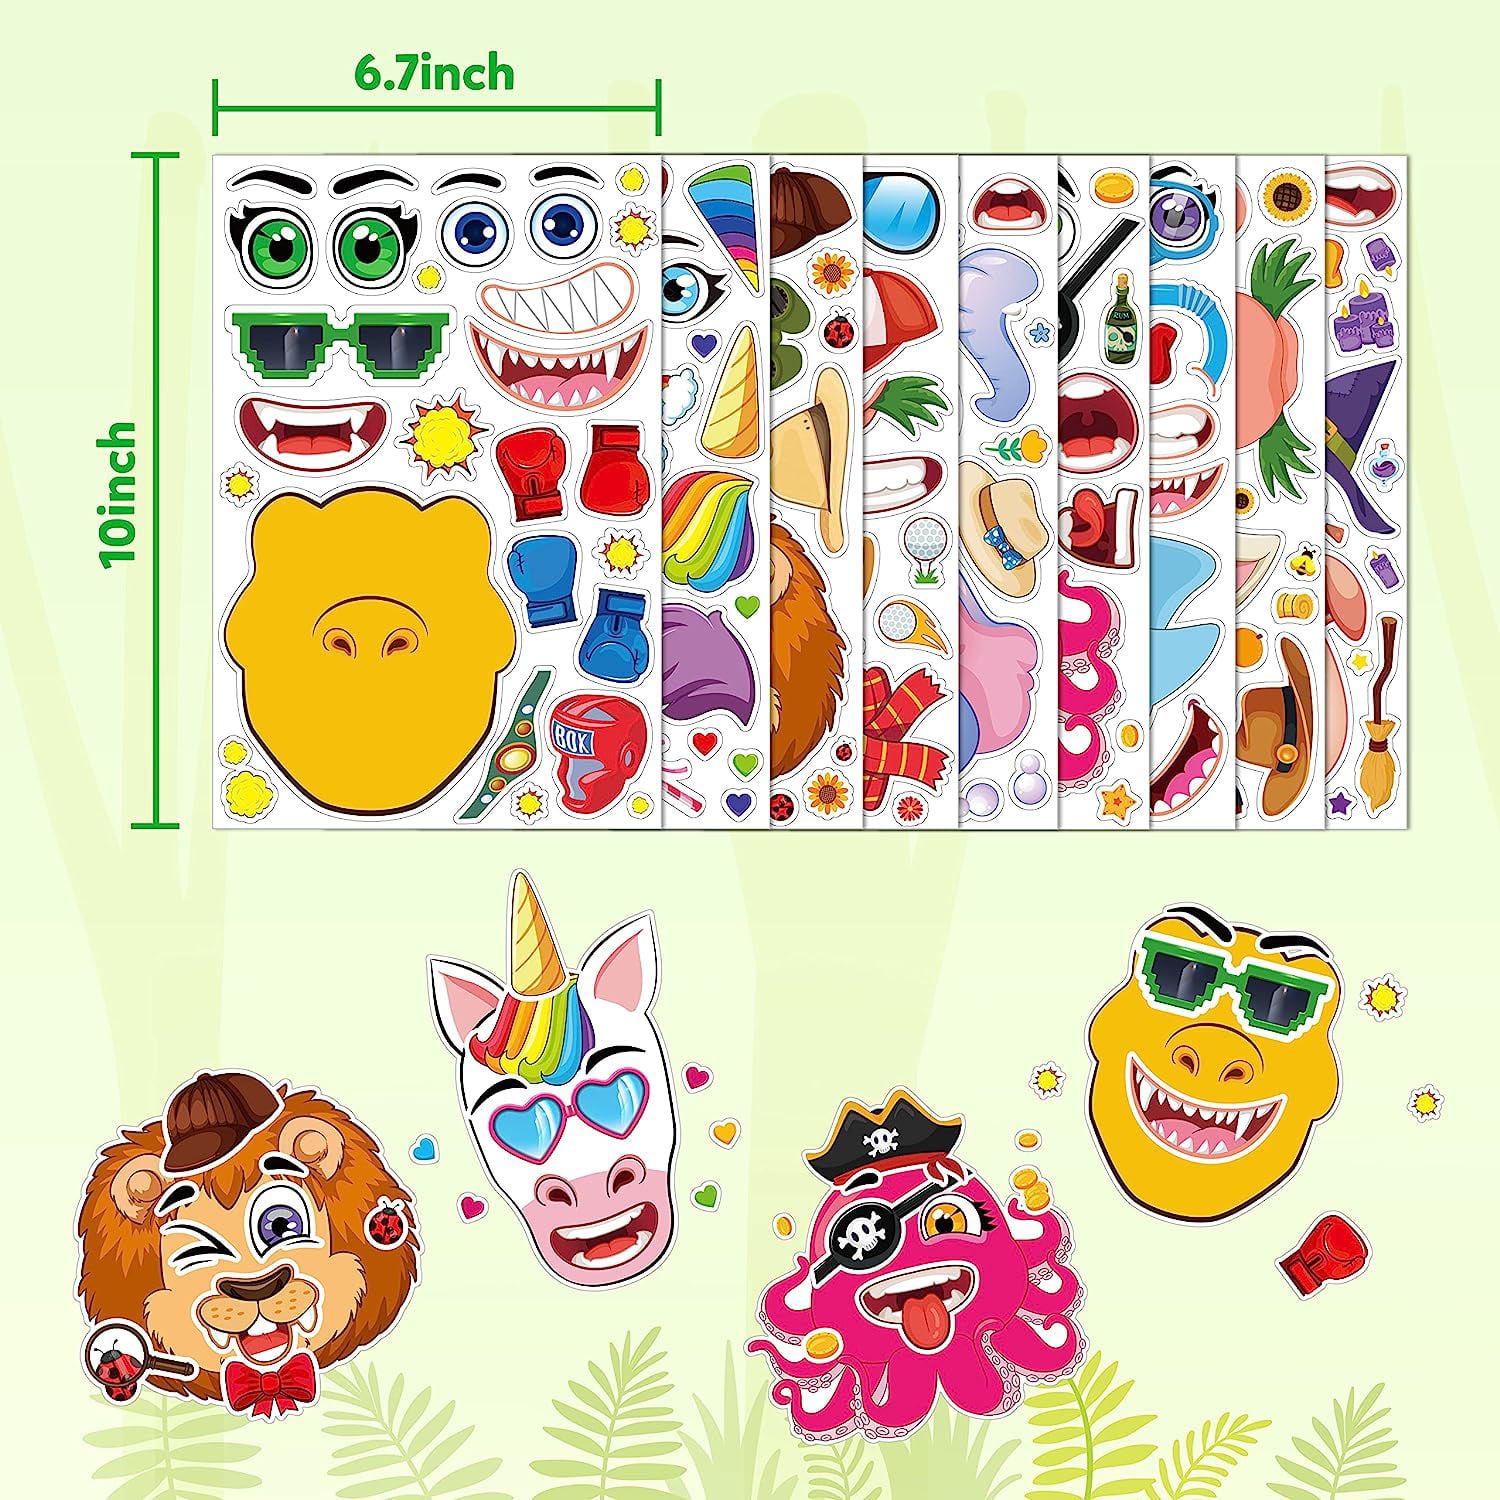 SEWACC 4 Sheets Rainbow Face Sticker Sports Running Party